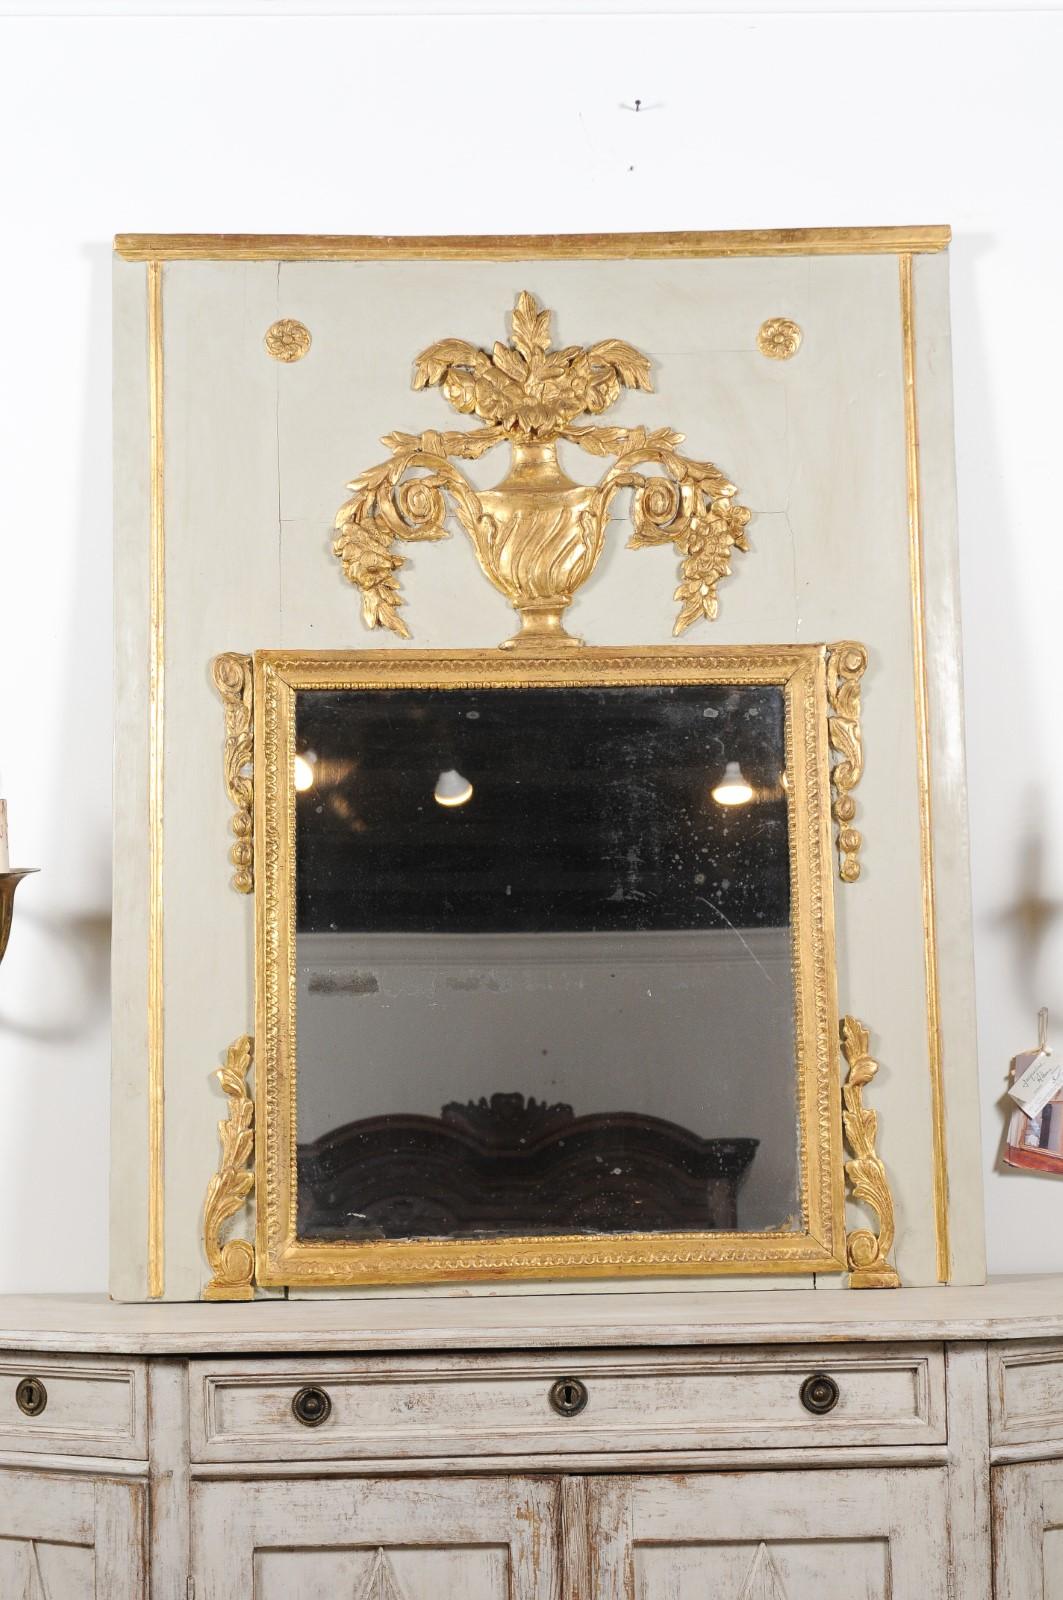 A French Transition period painted and gilt trumeau mirror from the 18th century, with urn, flowers, foliage and volutes. Created in France during the third quarter of the 18th century, this trumeau mirror presents the stylistics characteristics of